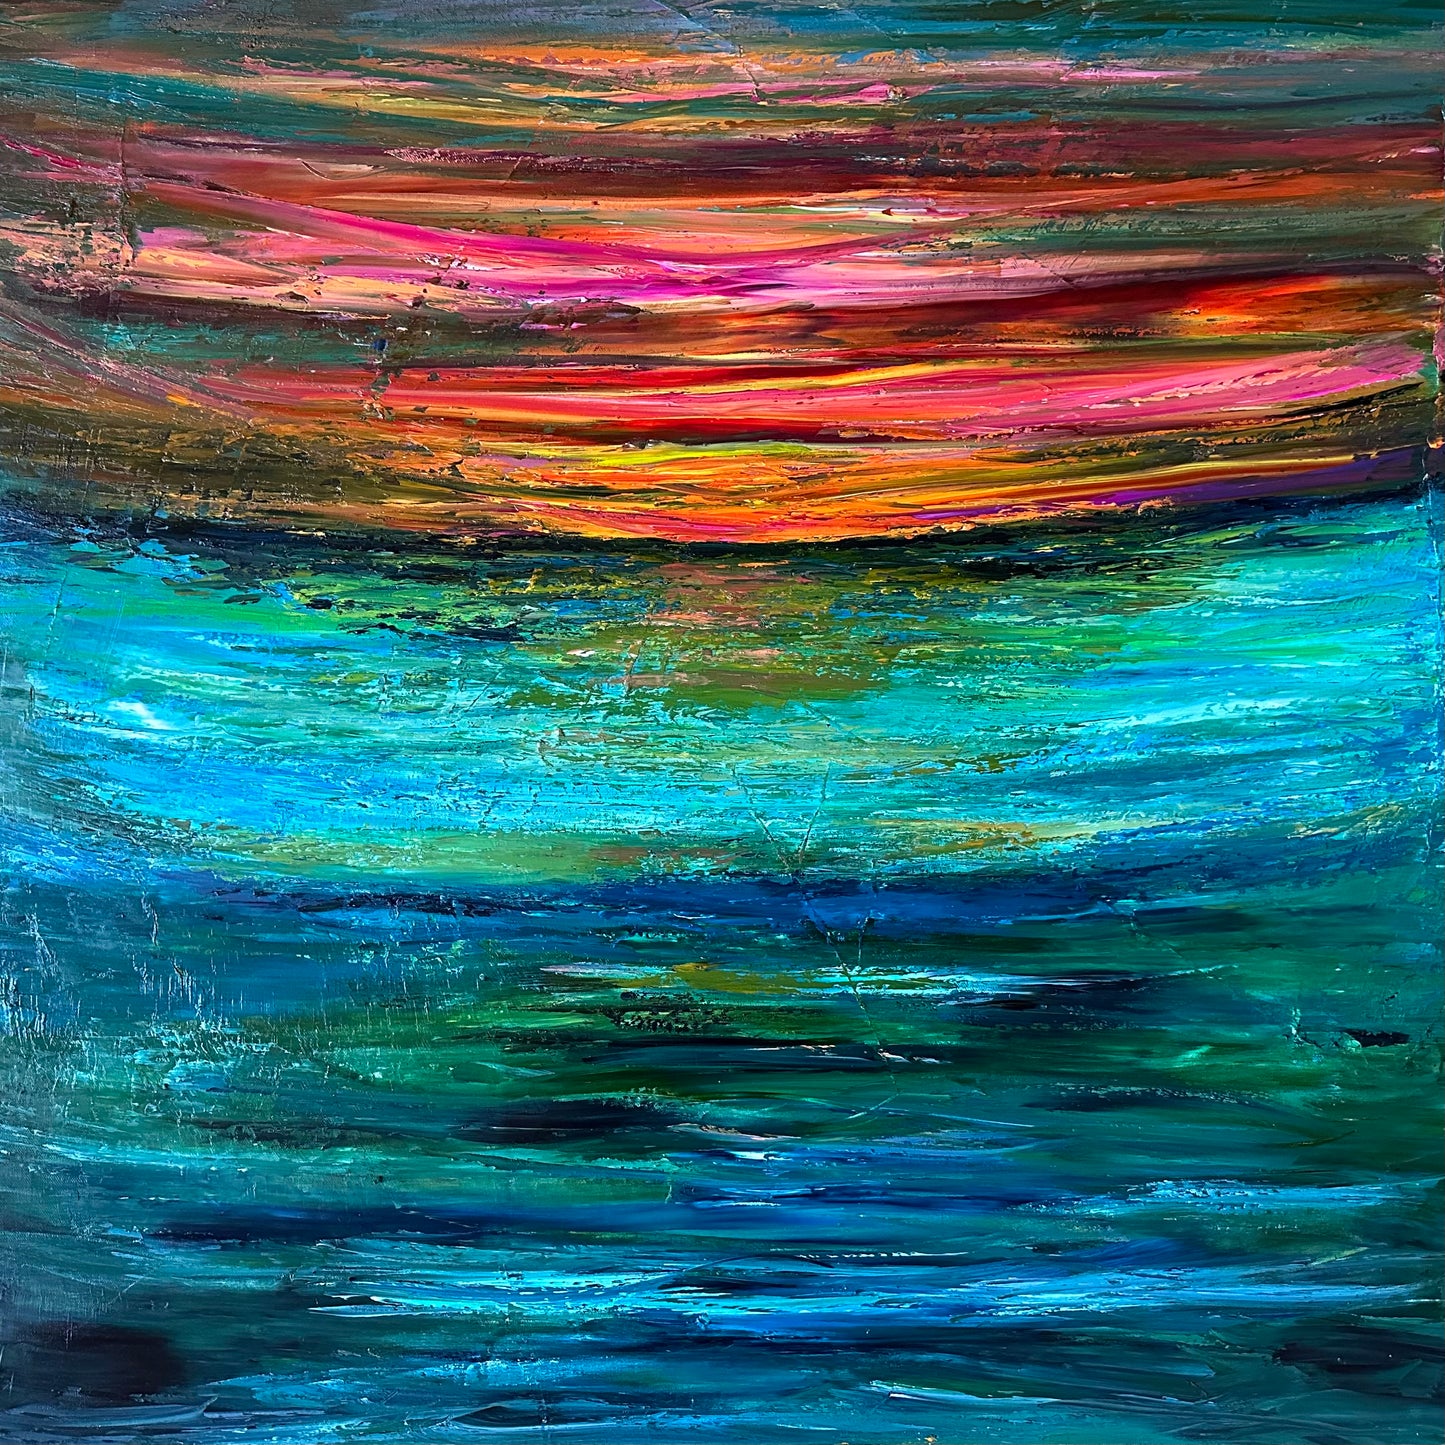 Painting of a sunset using Gerhard Richter techniques.